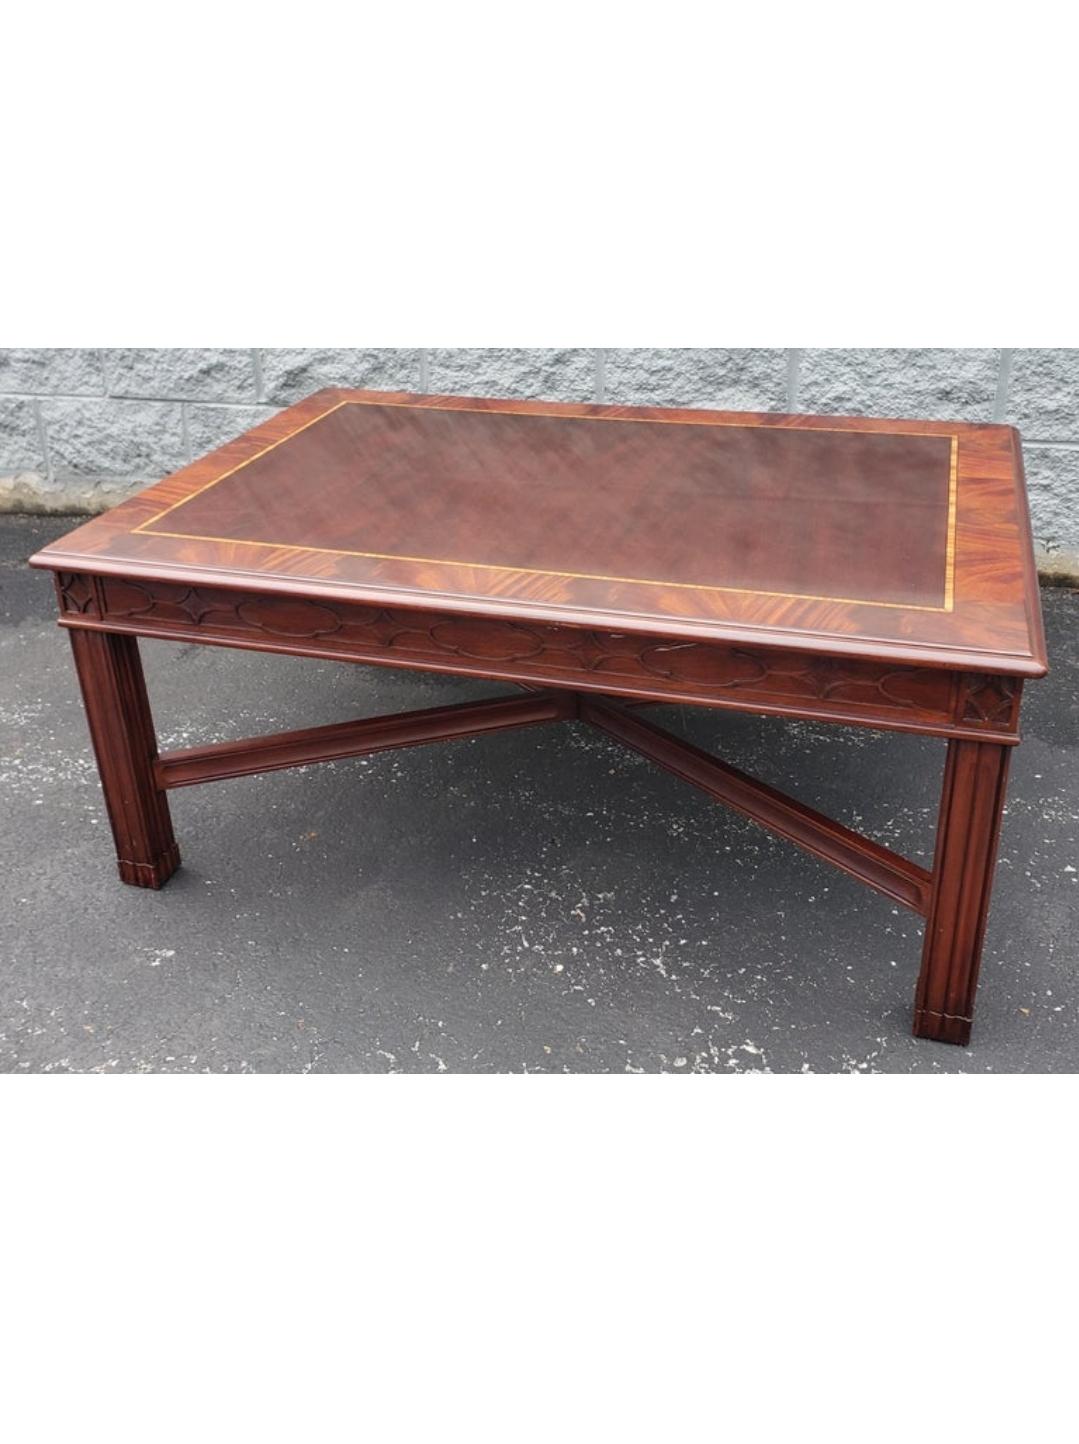 Henkel Harris Chippendale Mahogany and Tulipwood Inlay Coffee Table w/ Fretwork In Excellent Condition For Sale In Germantown, MD